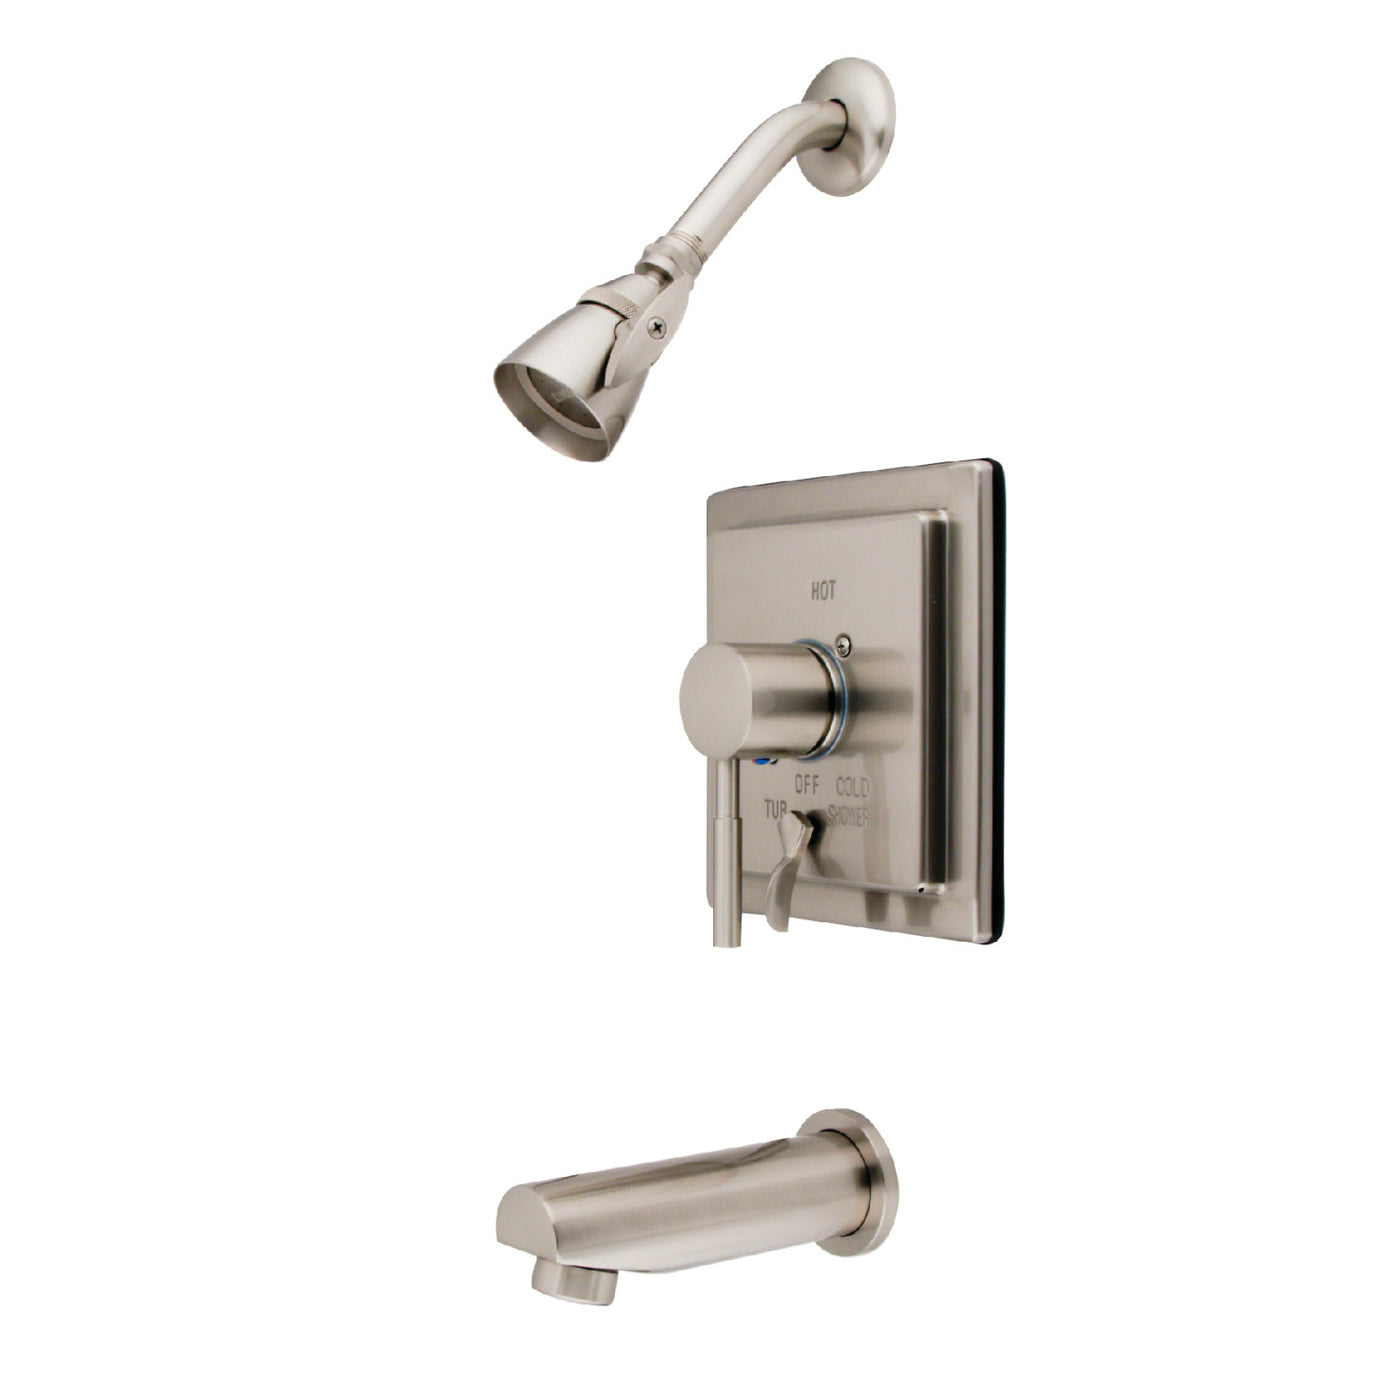 Elements of Design EB86580DL Single-Handle Tub and Shower Faucet, Brushed Nickel